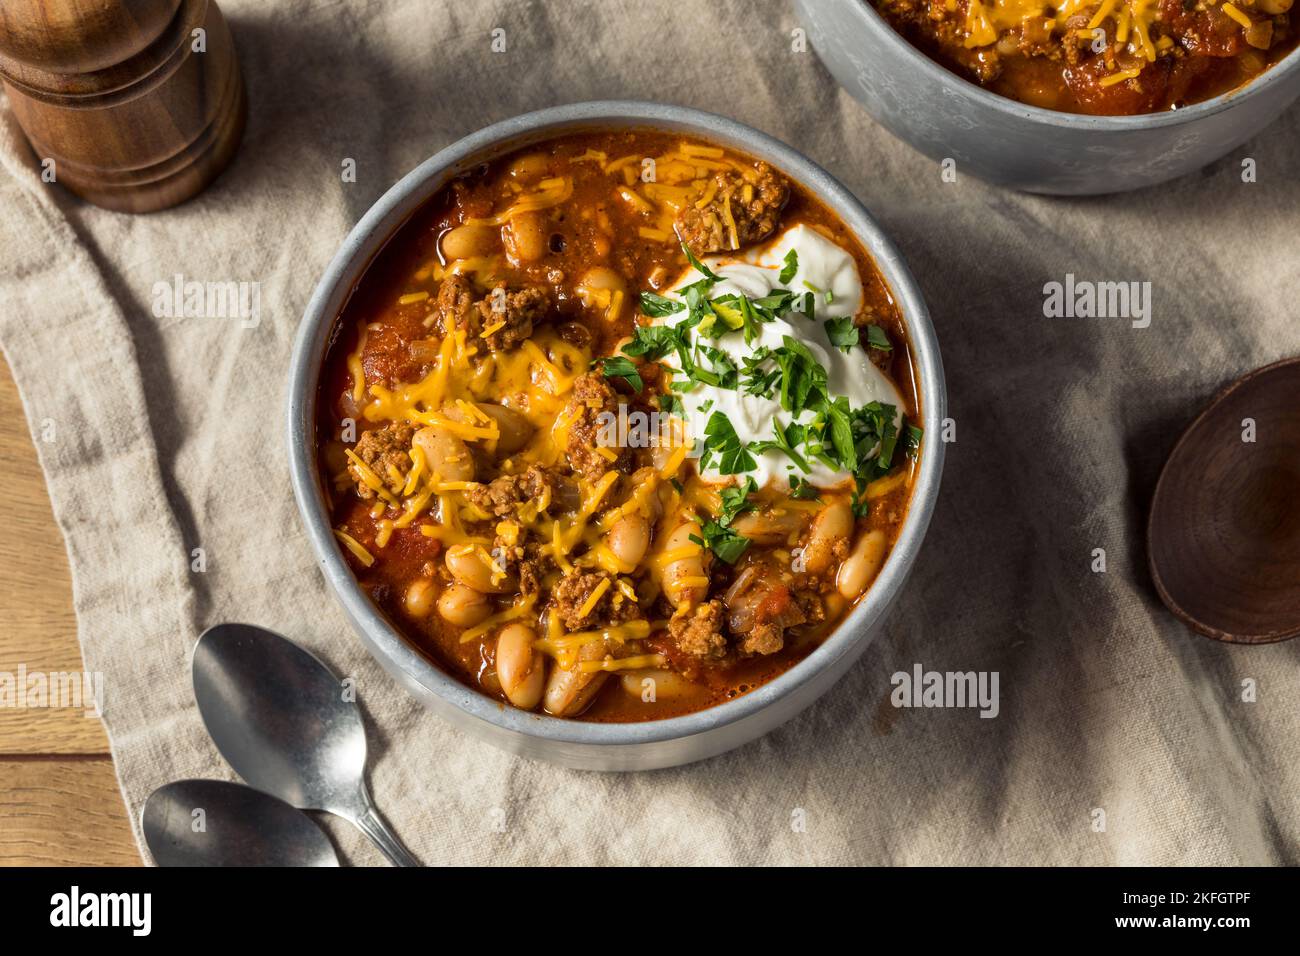 Homemade Turkey Chili Con Carne with Sour Cream and Cheese Stock Photo